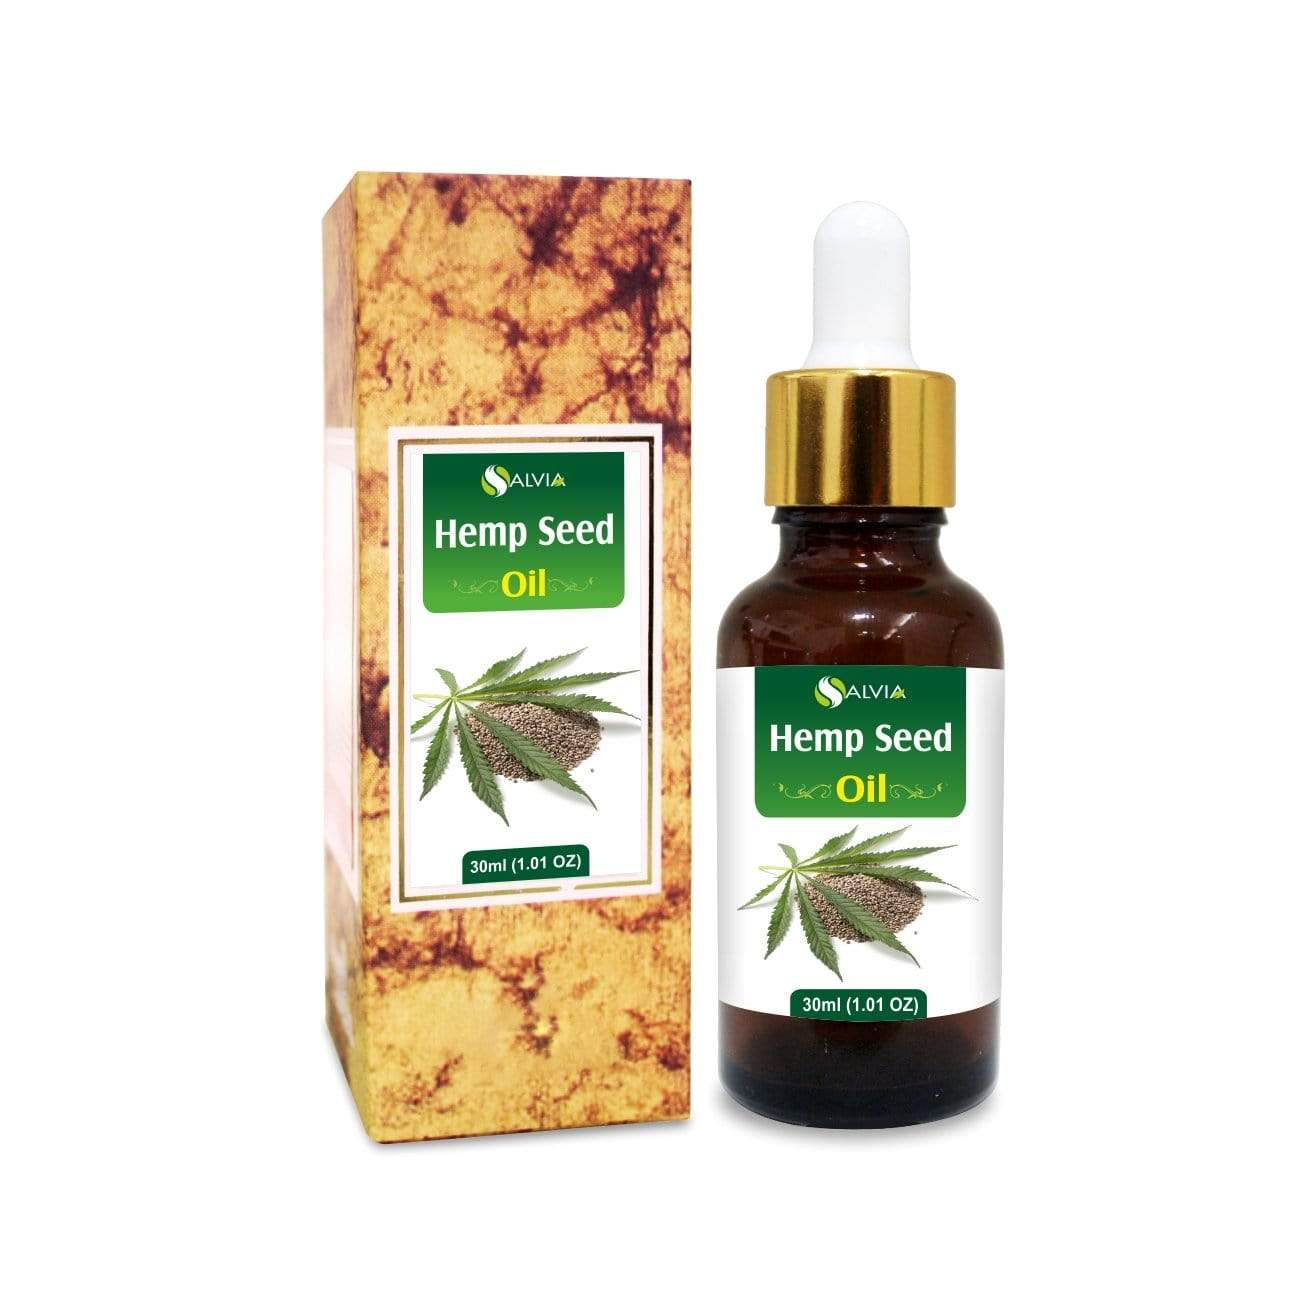 Salvia Natural Carrier Oils 30ml Hemp Seed Oil (Cannabis sativa) | Pure And Natural Non- comedogenic Seed Oil | Alleviate Dry Skin, Strengthen Nails And Heal Cuticles, Remove Makeup, Condition Hair, Reduce Acne